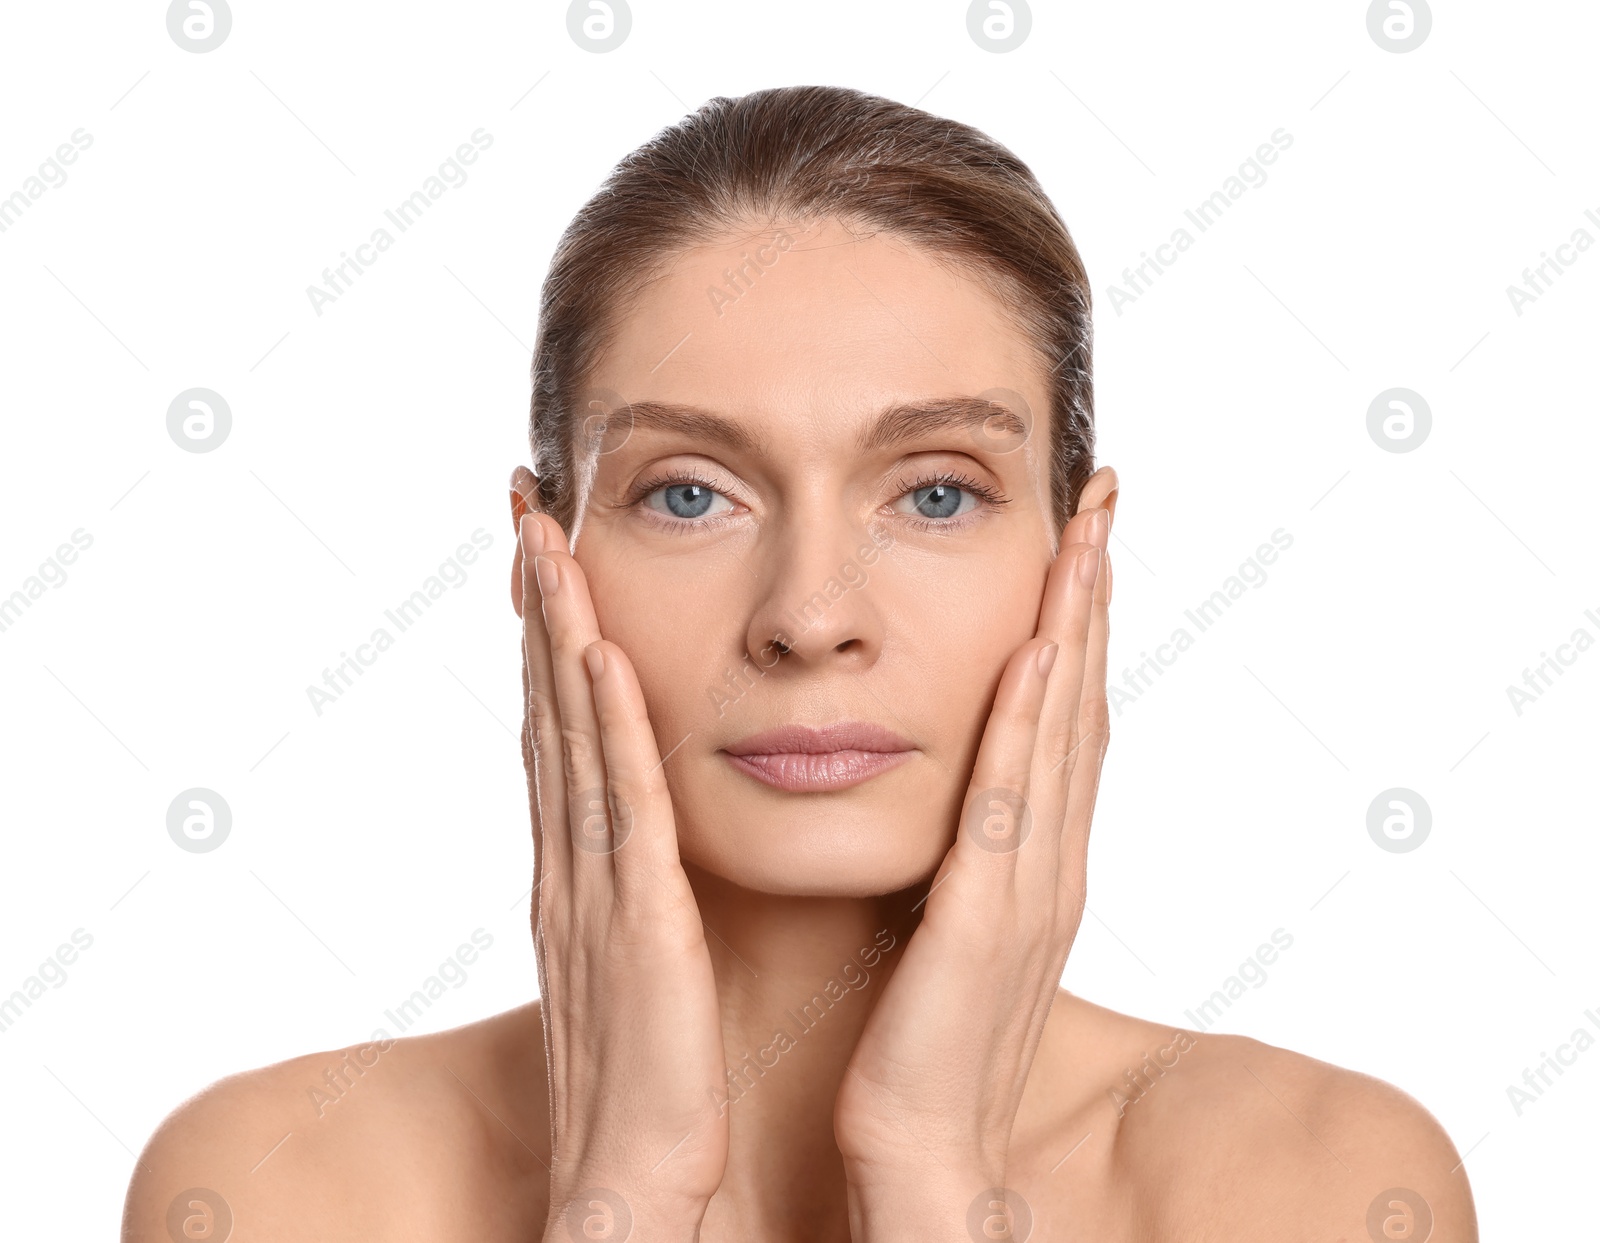 Photo of Woman massaging her face on white background